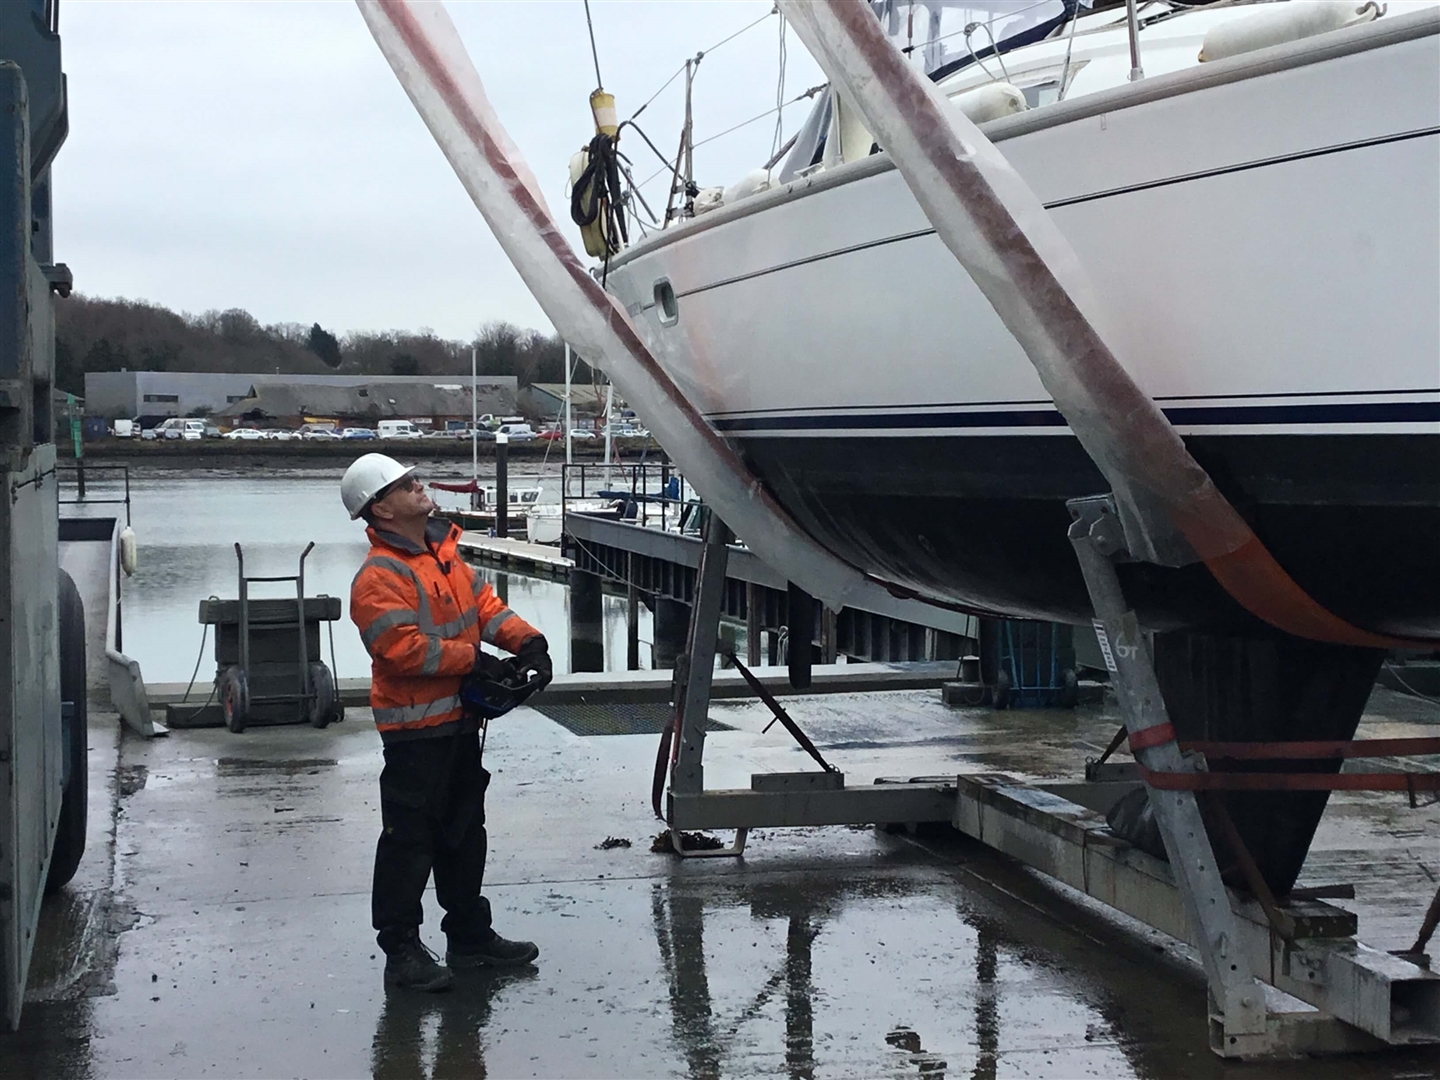 Andy Trim inspecting a yacht